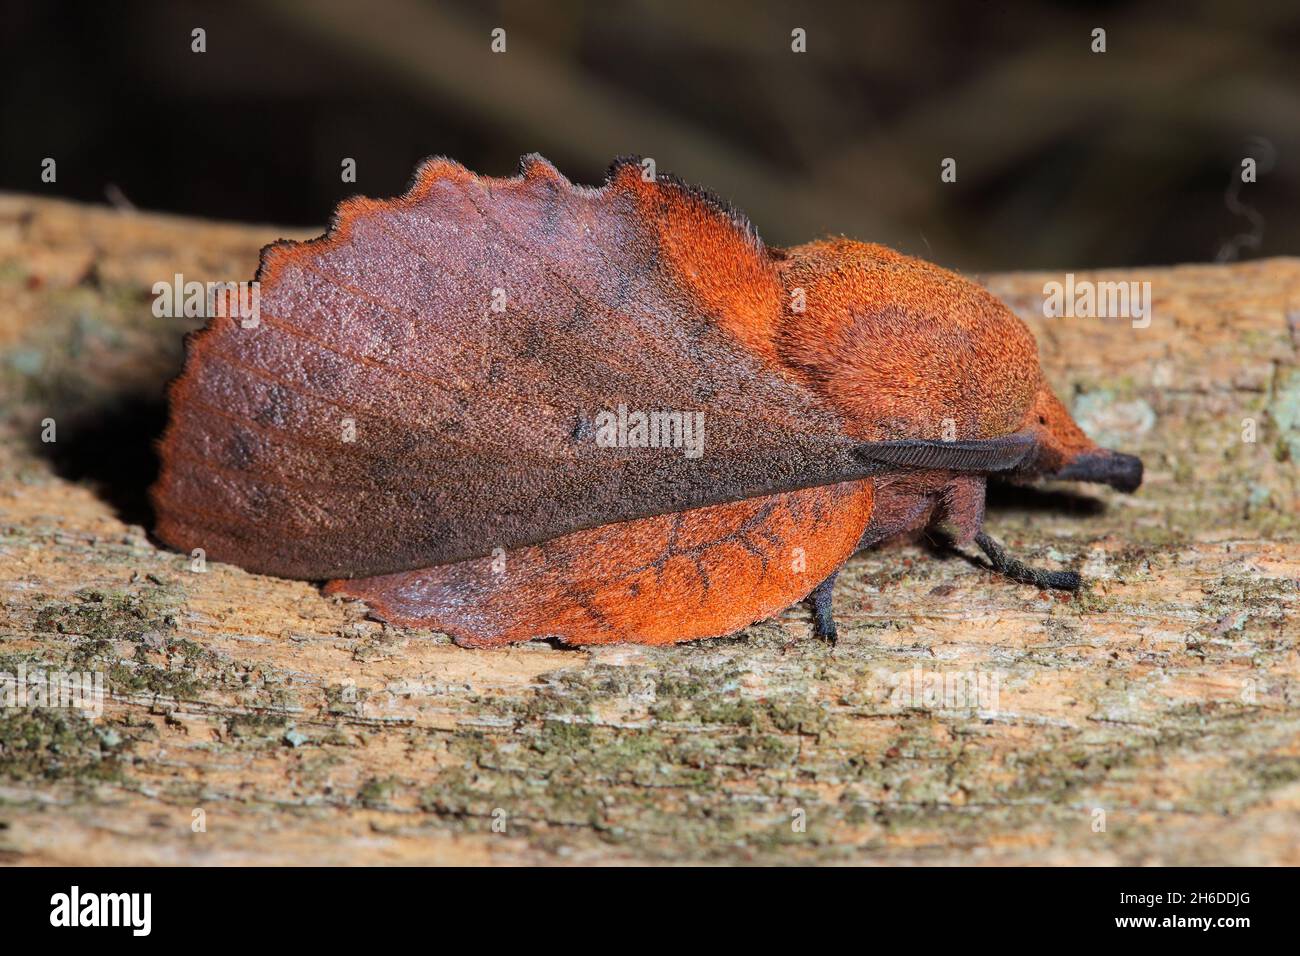 lappet (Gastropacha quercifolia, Phalaena quercifolia), sits on bark, young butterfly with violet gleam, Germany Stock Photo